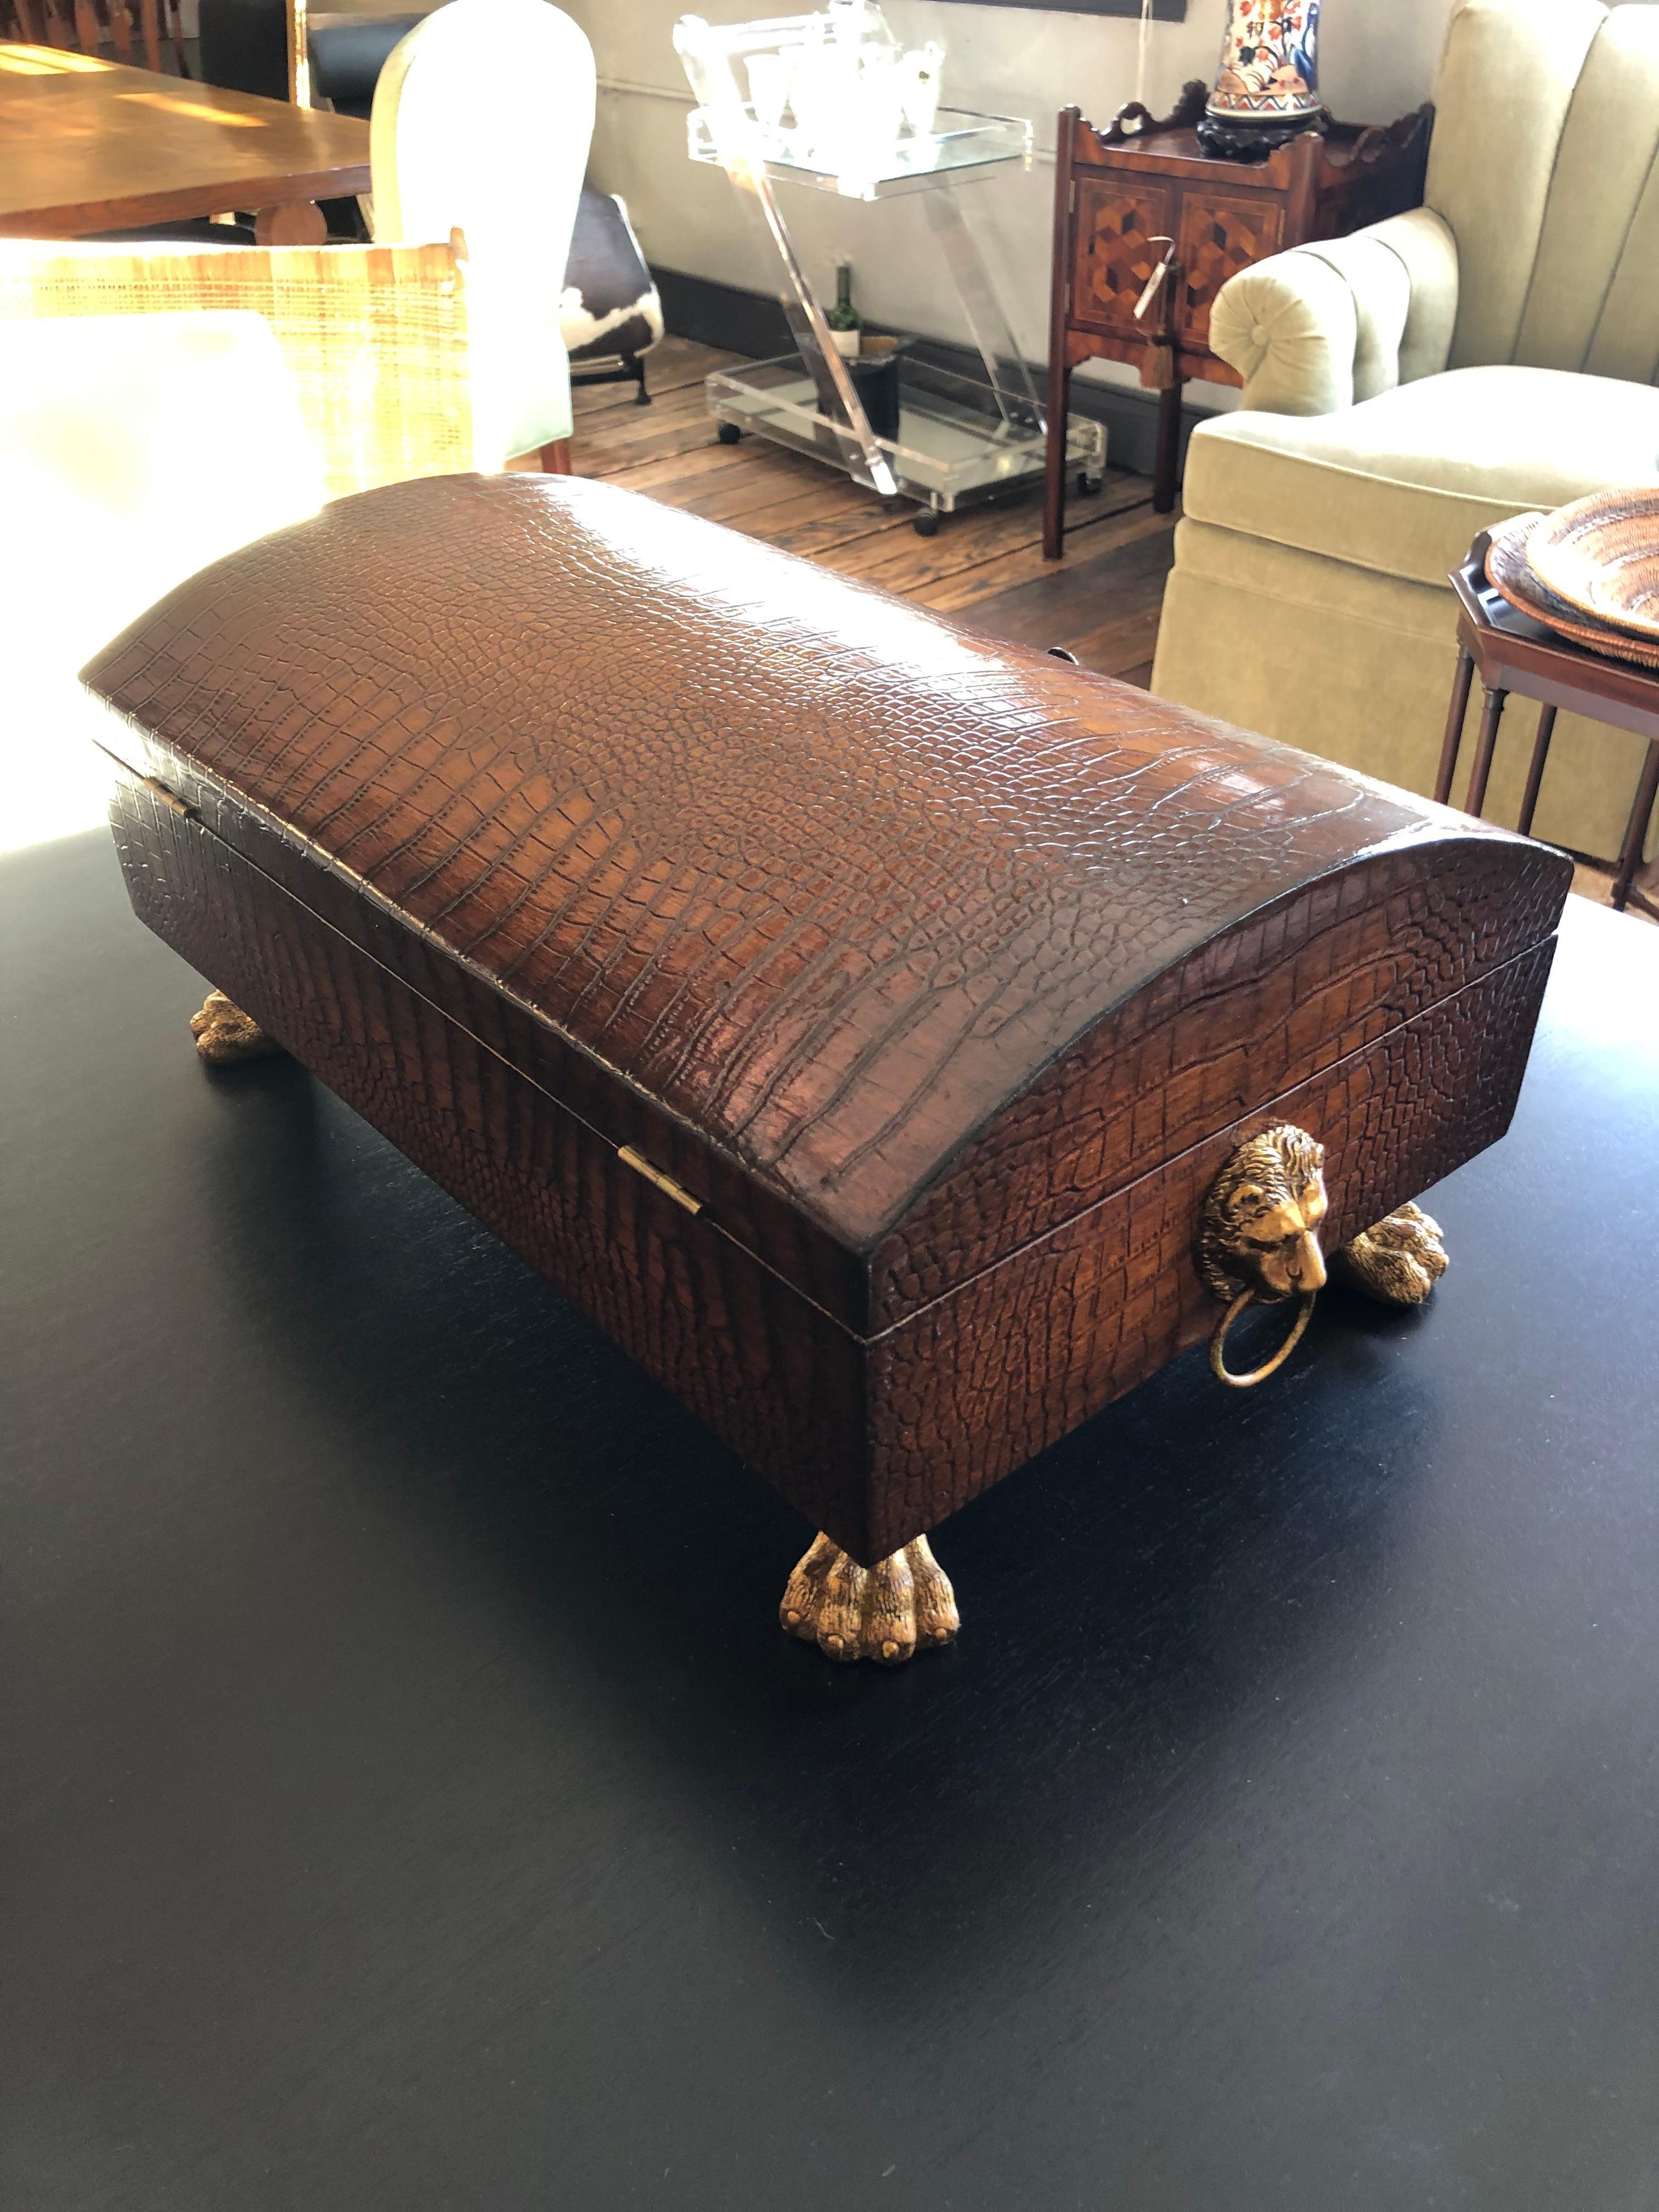 Stunning large carved wood decorative box having the appearance of rich crocodile.  There are brass lion head handles on each side, a round knob for opening, and handsome paw feet.